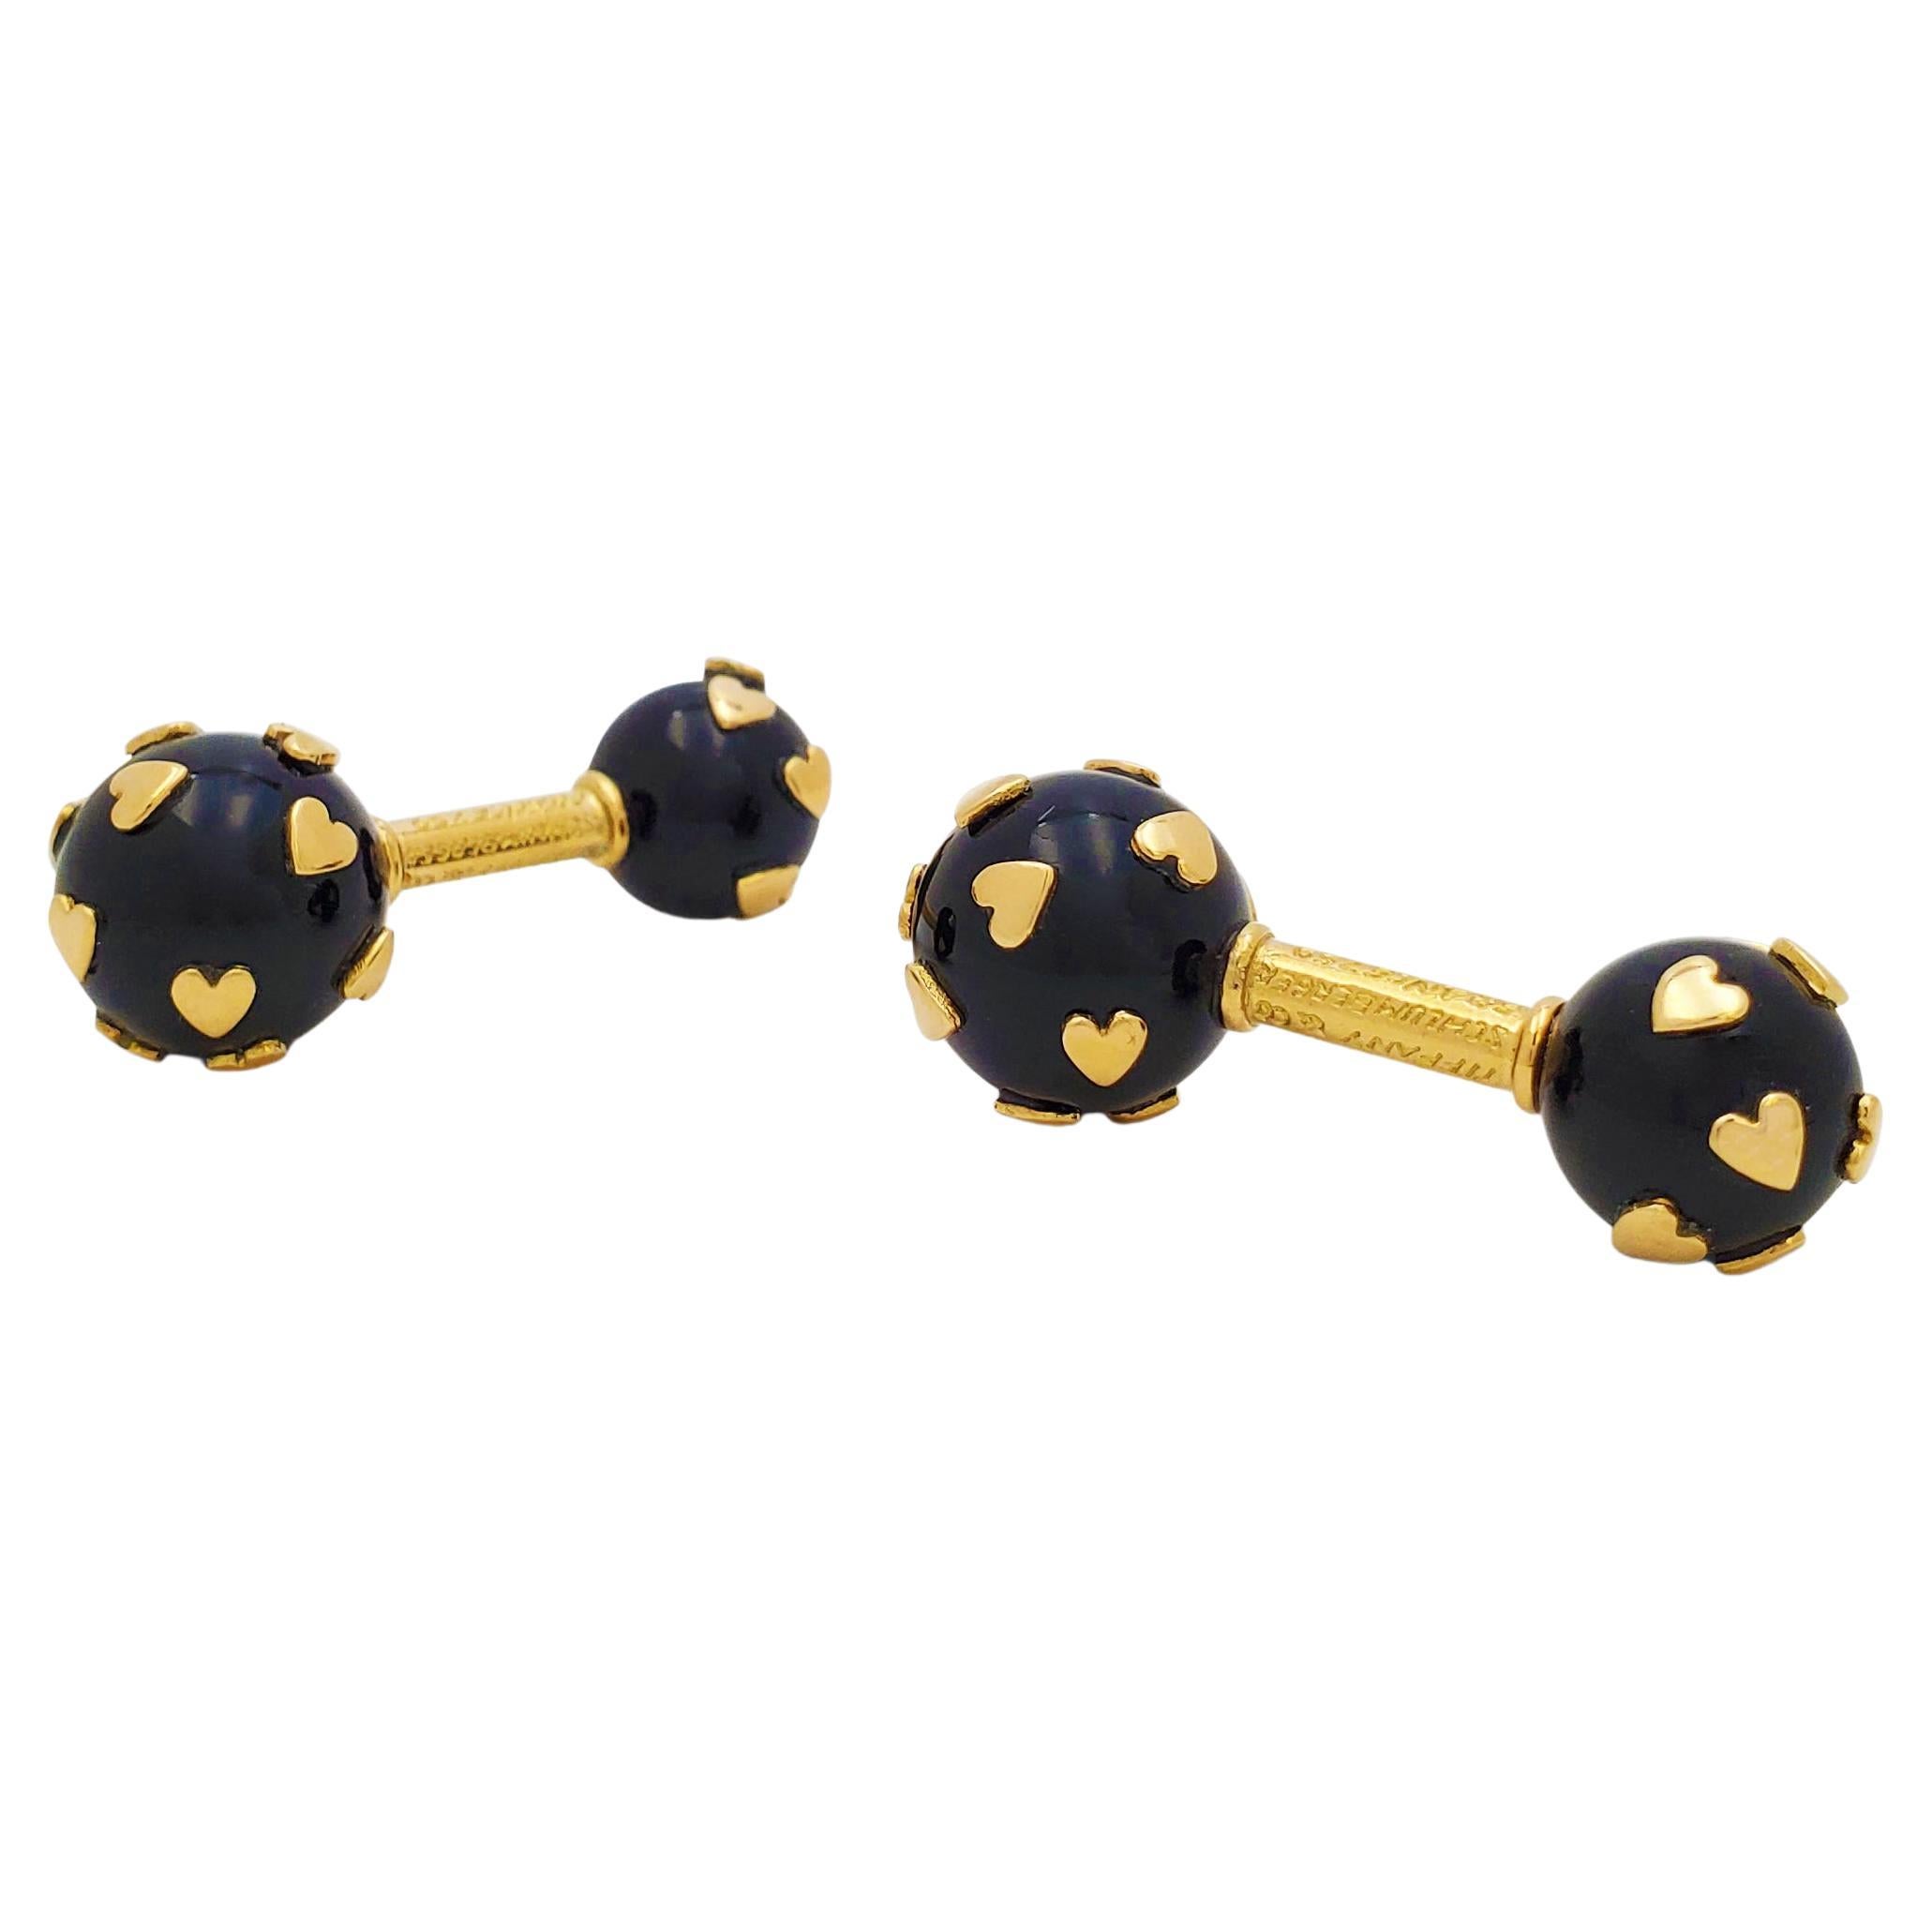 Jean Schlumberger for Tiffany & Co. Yellow Gold Onyx Heart Cufflinks